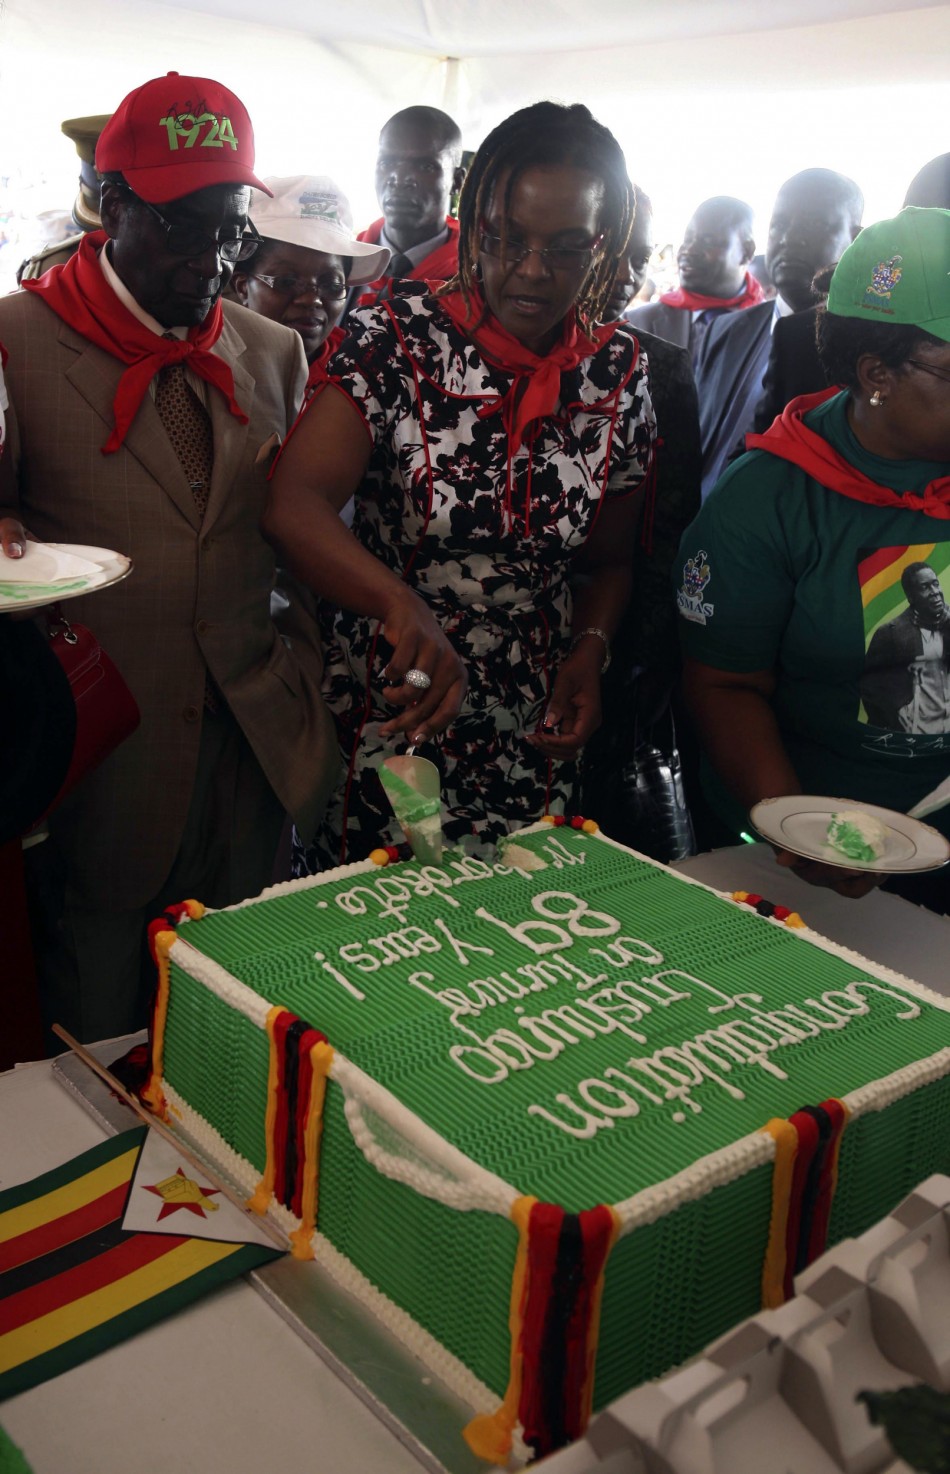 Zimbabwes President Robert Mugabe looks at his wife Grace cutting a cake during an event marking his 89th birthday at Chipadze stadium in Bindura, about 90 km 56 miles north of the capital Harare March 2, 2013. Addressing a rally to mark his 89th